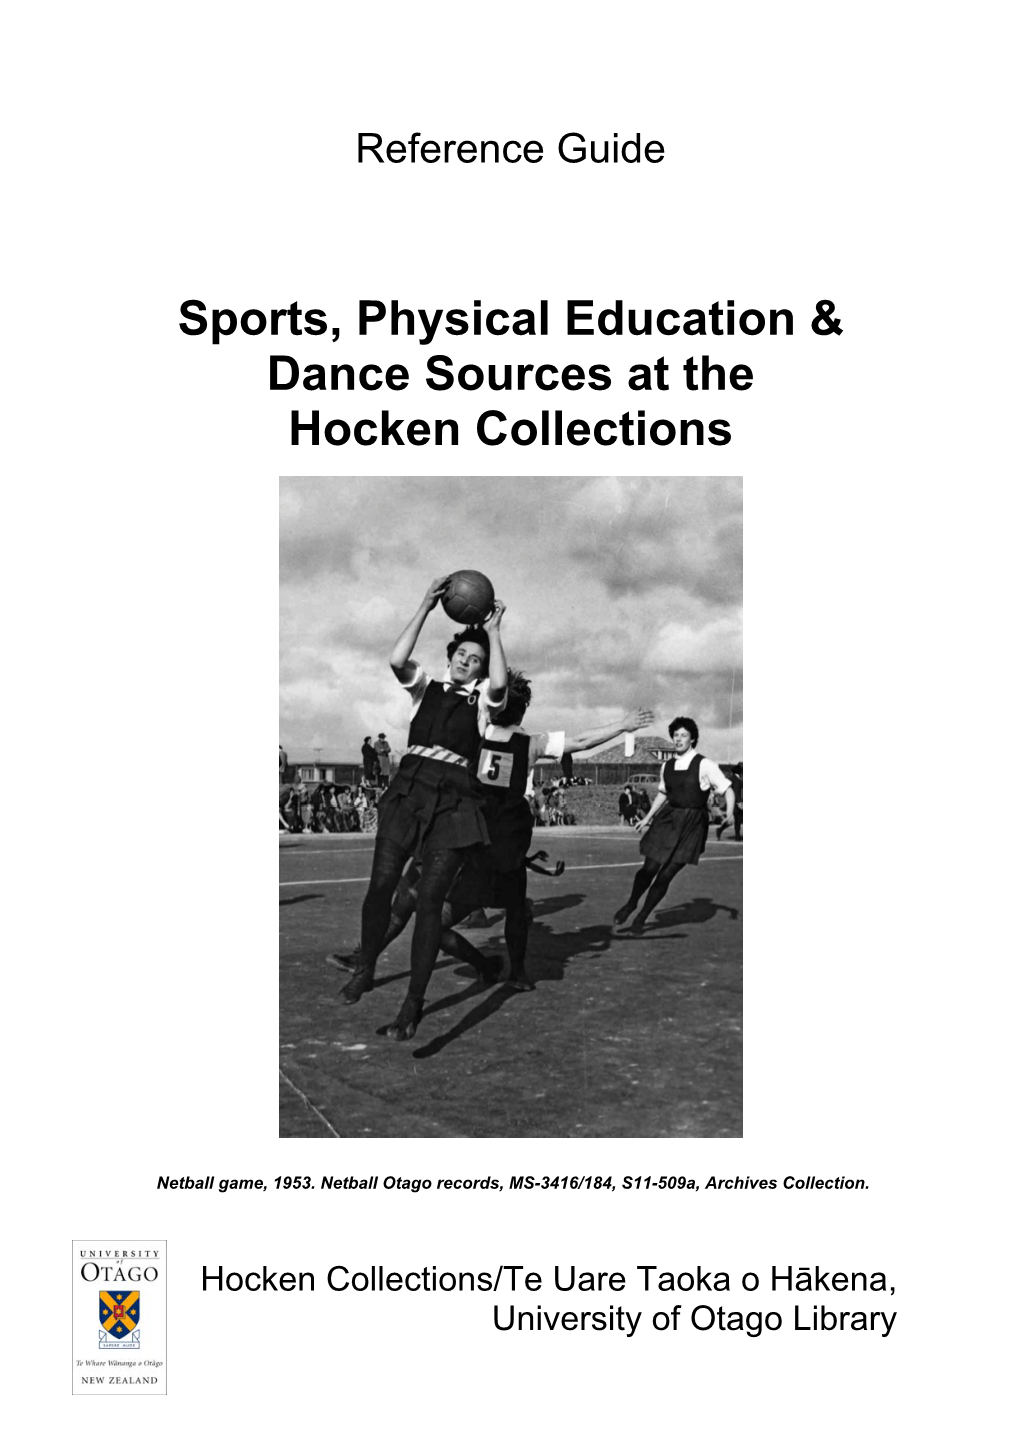 Sports, Physical Education & Dance Sources at the Hocken Collections